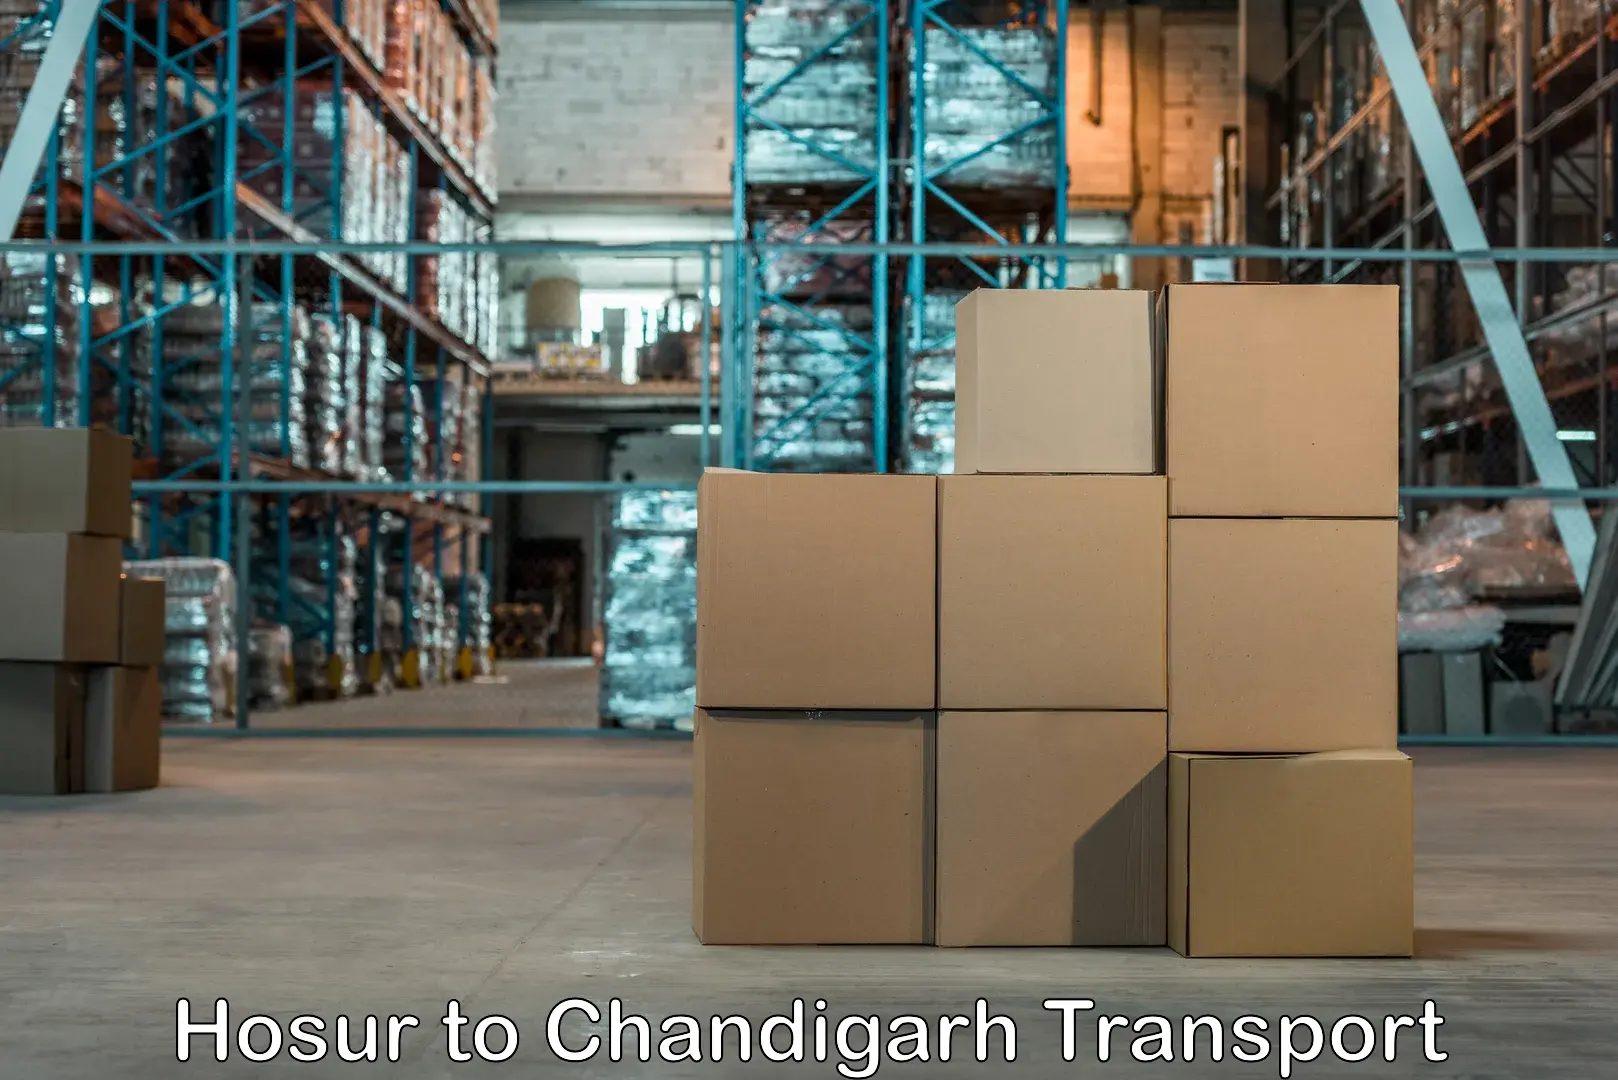 Commercial transport service Hosur to Chandigarh